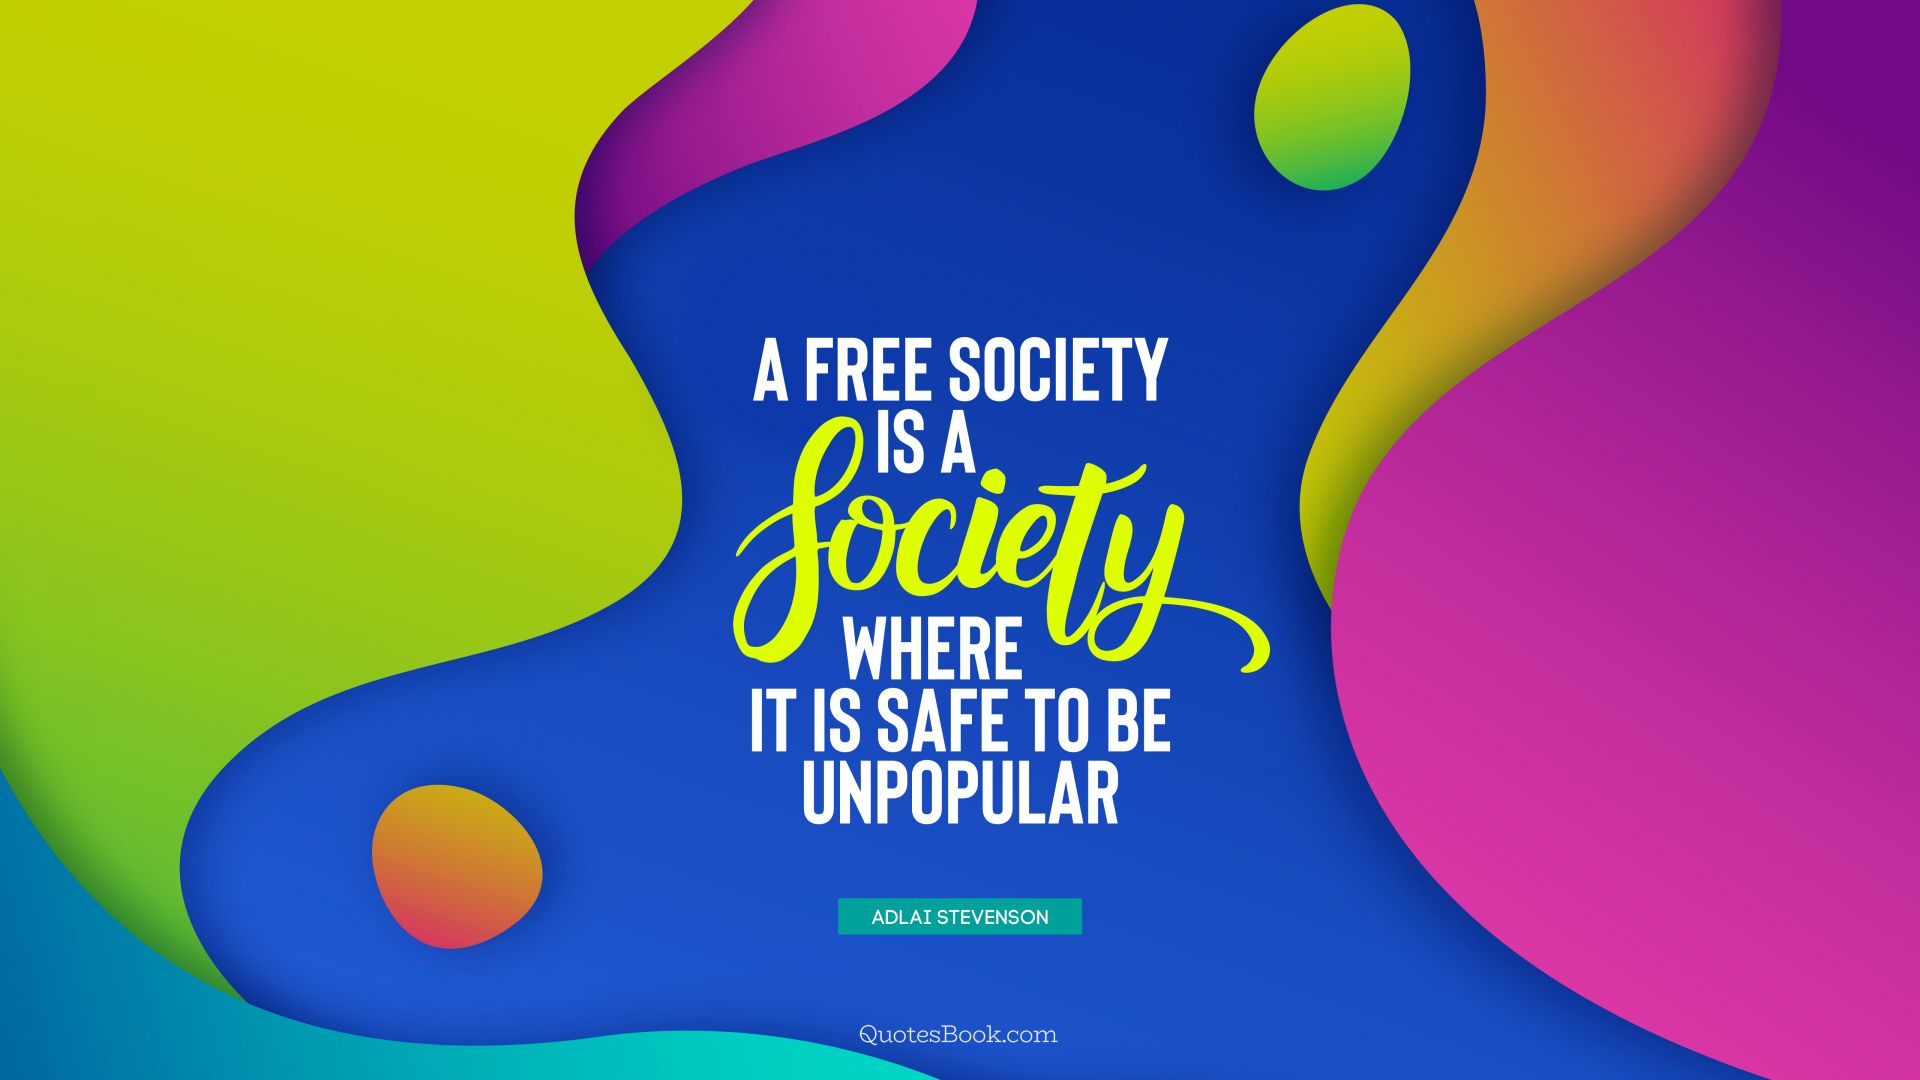 A free society is a society where it is safe to be unpopular. - Quote by Adlai Stevenson